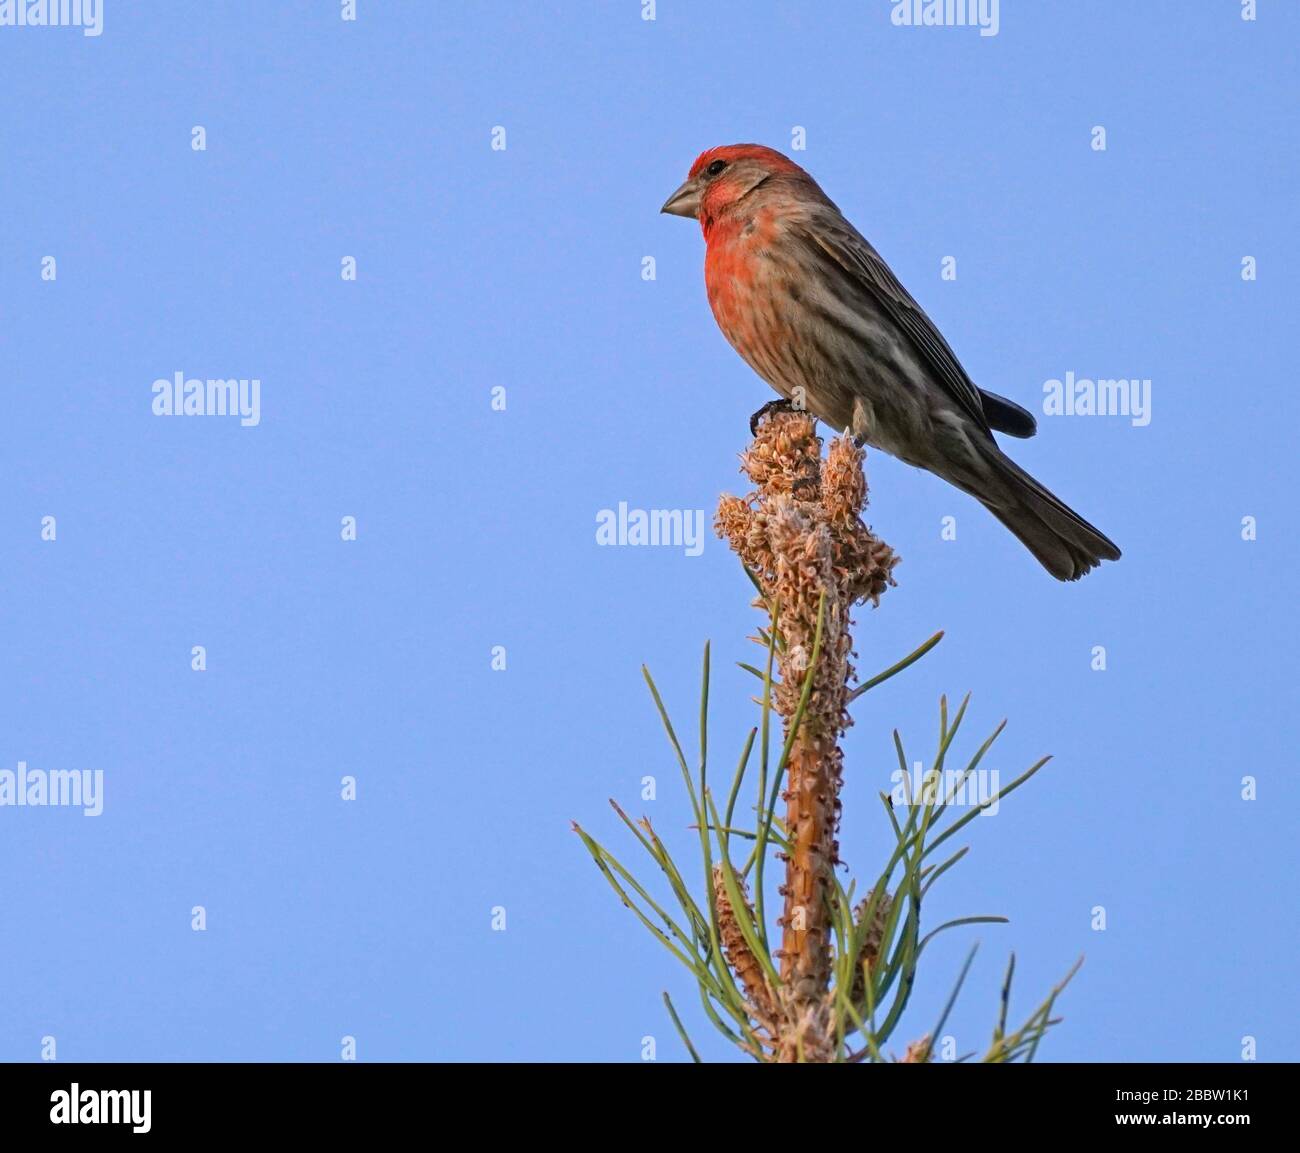 A House Finch sits on the very top of a pine tree in the late afternoon light. Stock Photo